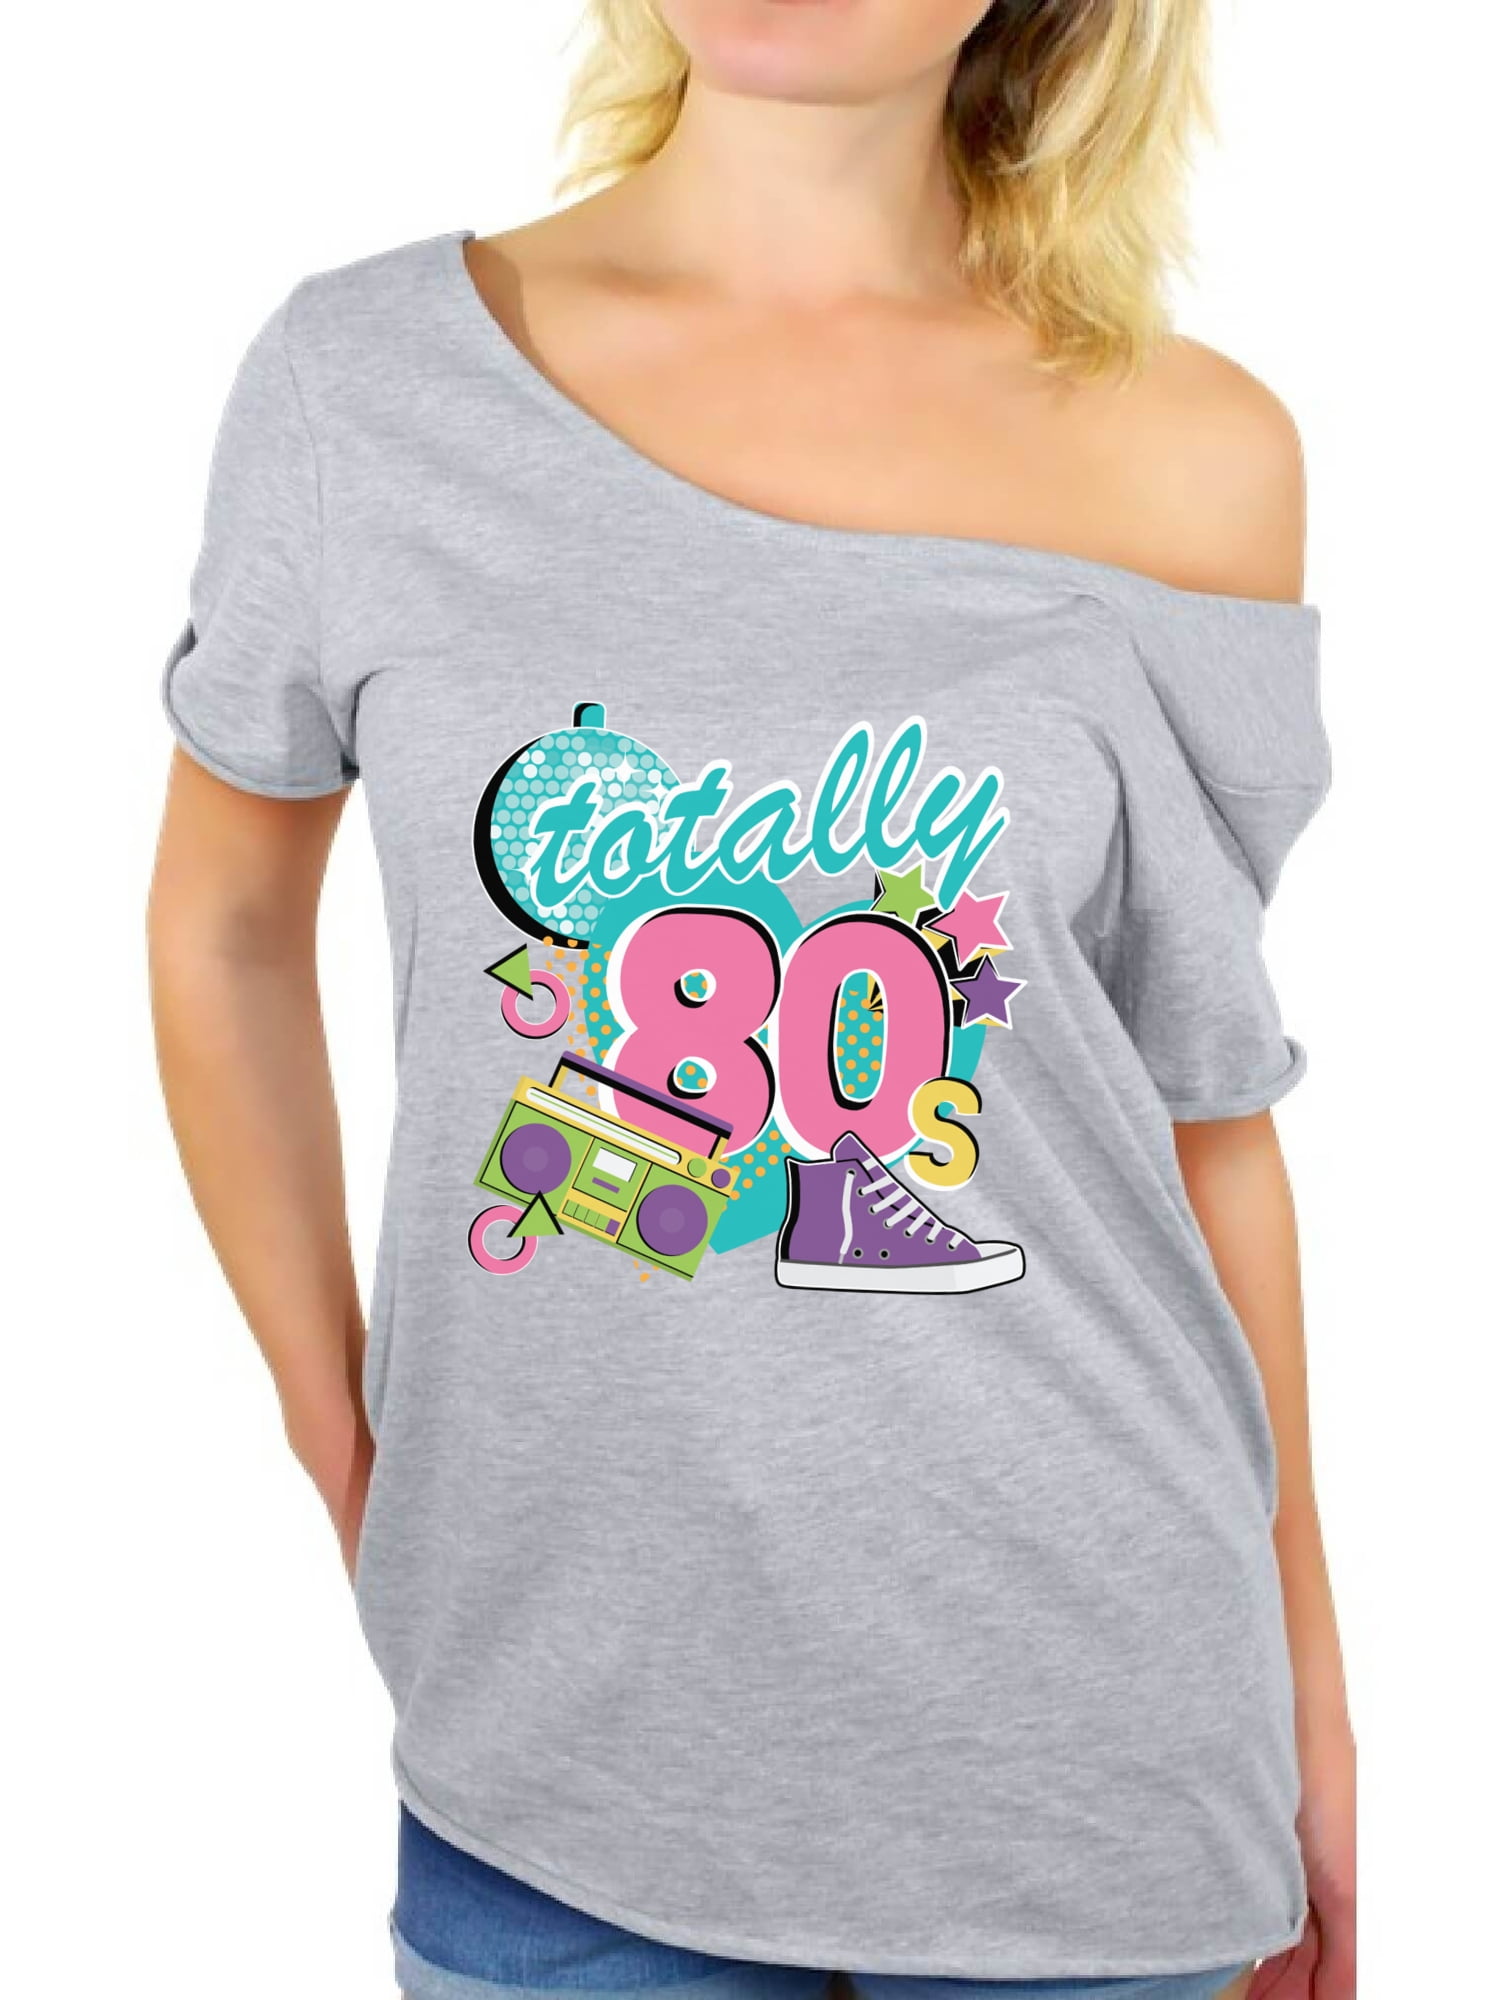 Awkward Styles 80s Party Shirt Totally 80's Shirt 80s T-shirt Womans 80s  Accessories 80s Rock T Shirt 80s T Shirt Retro Vintage Neon T-Shirt 80s  Costume 80s Clothes for Women 80s Outfit